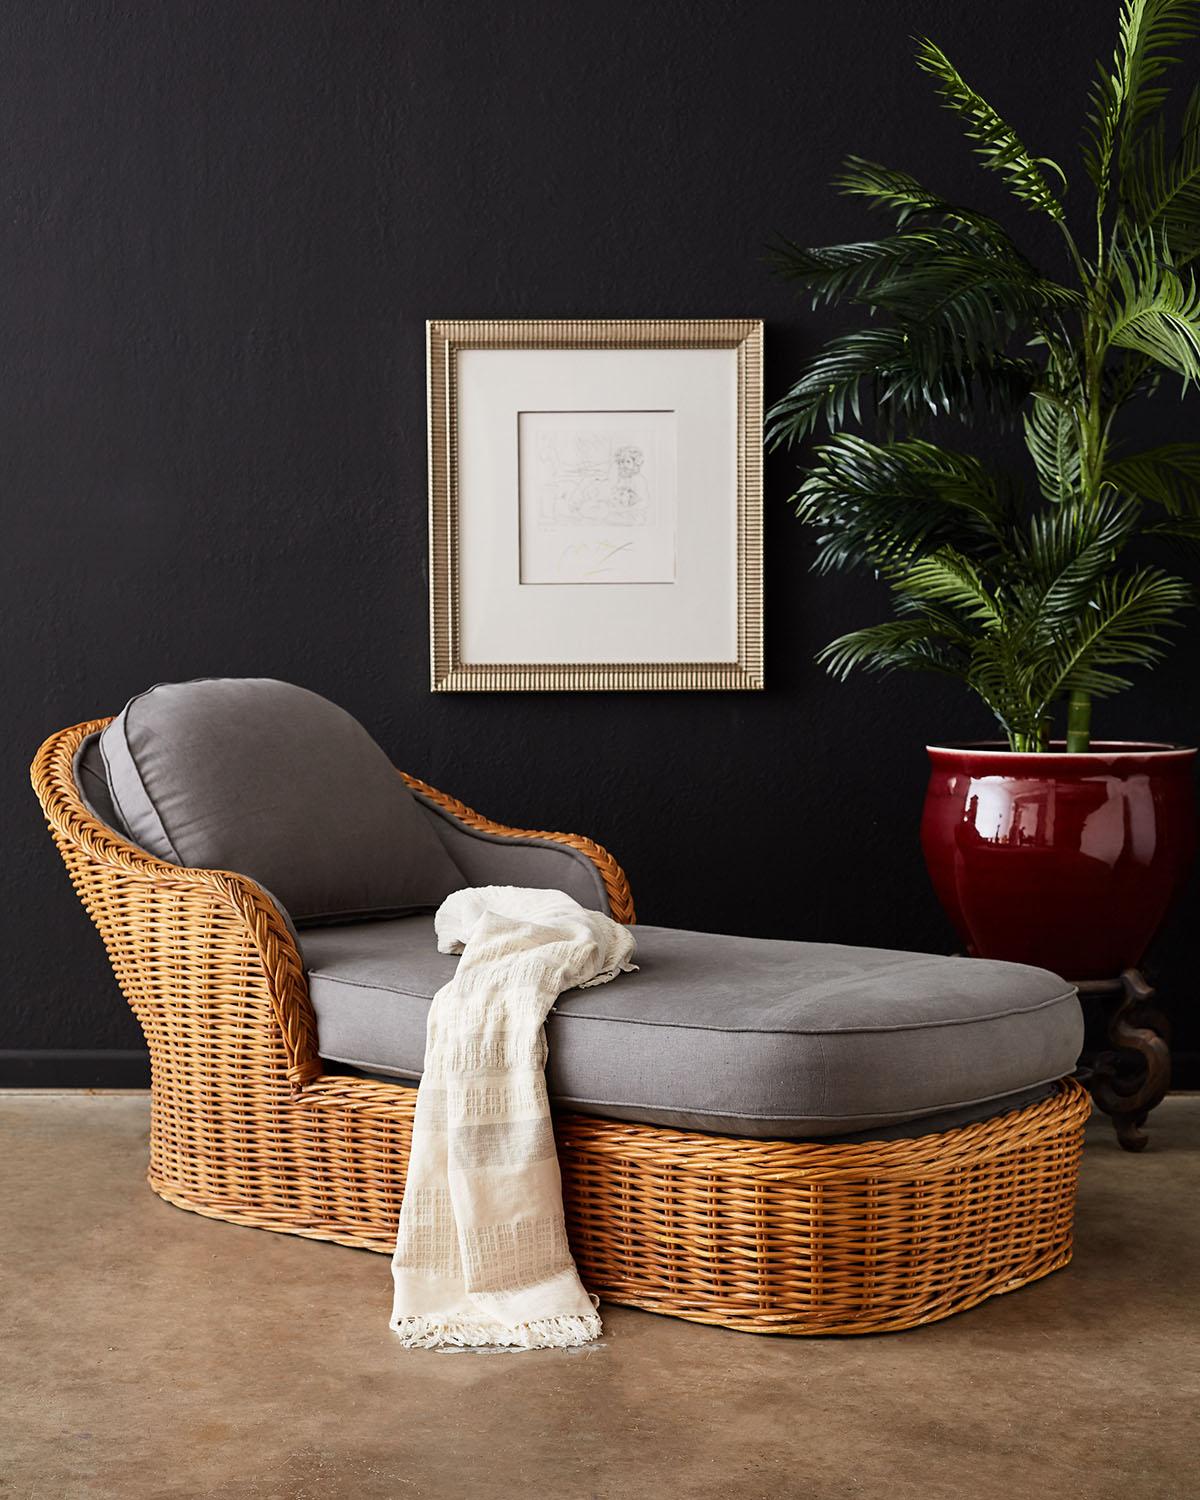 Oversized wicker and rattan chaise lounge or chaise longue made in the manner and style of Michael Taylor. Large rattan frame covered with woven stick wicker with a decorative braided arm crest. The generous seat has a thick cushion on top and a